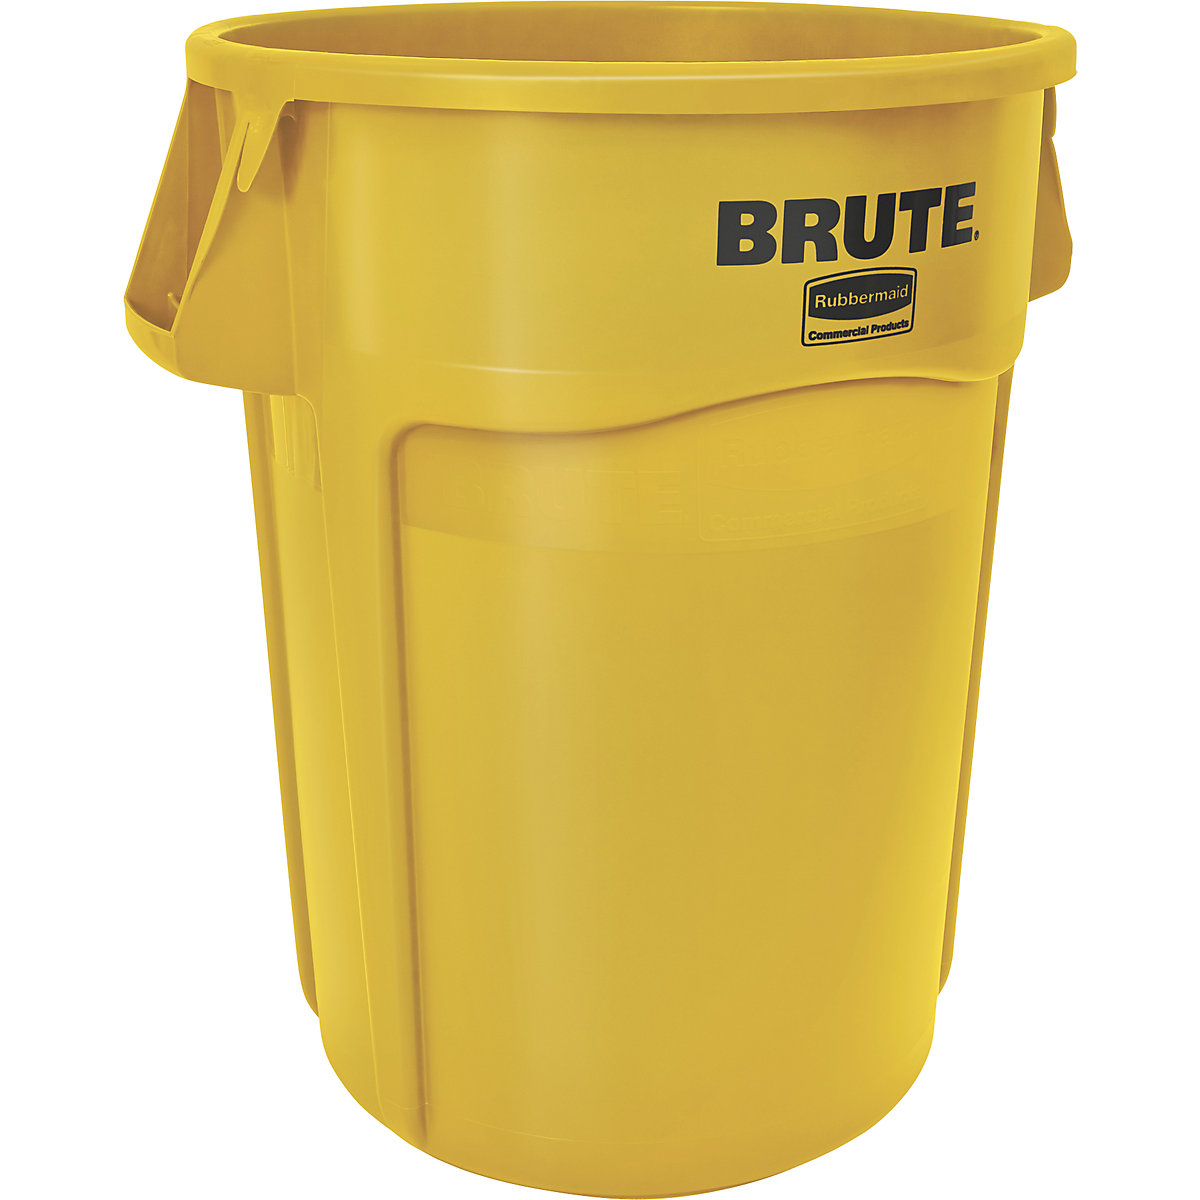 BRUTE® universal container, round – Rubbermaid, capacity 166 l, yellow-14